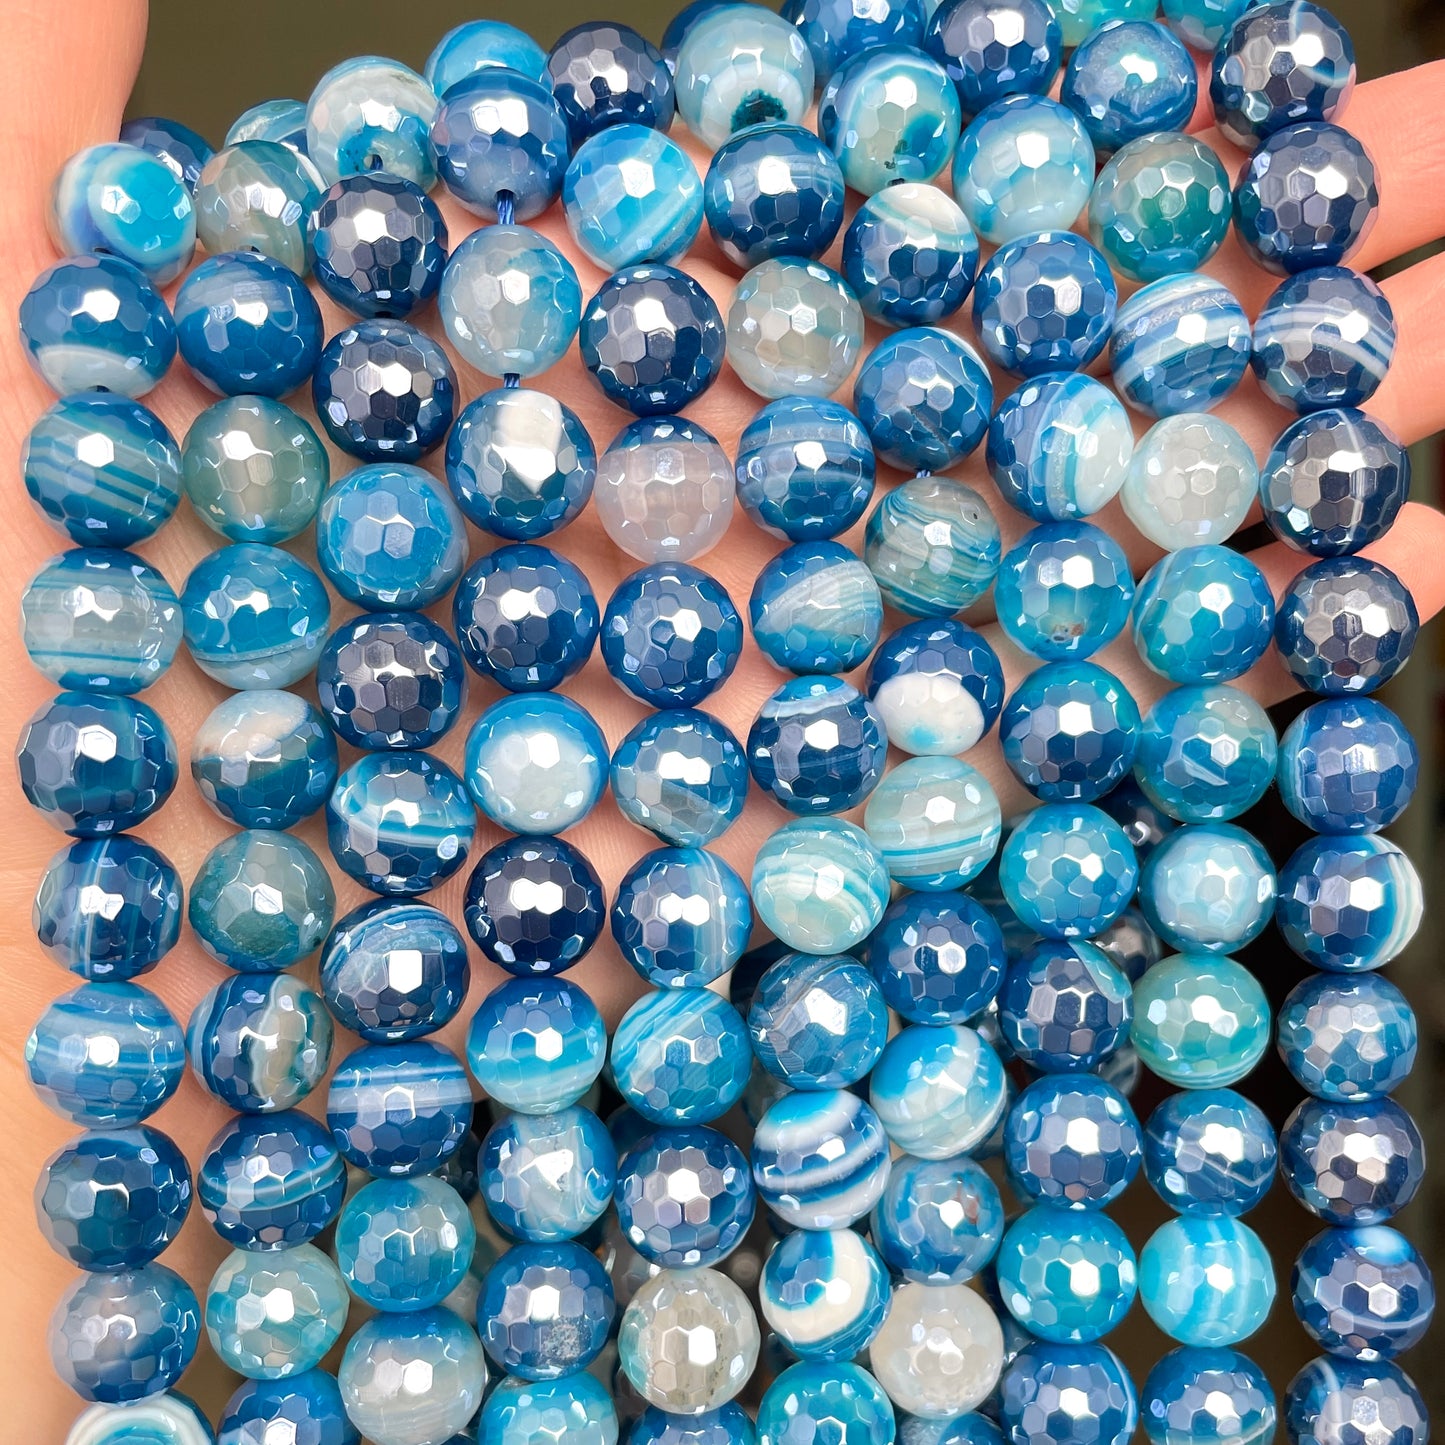 10, 12mm Electroplated Blue Banded Agate Stone Faceted Beads-Grade A Premium Quality Electroplated Beads 12mm Stone Beads New Beads Arrivals Premium Quality Agate Beads Charms Beads Beyond